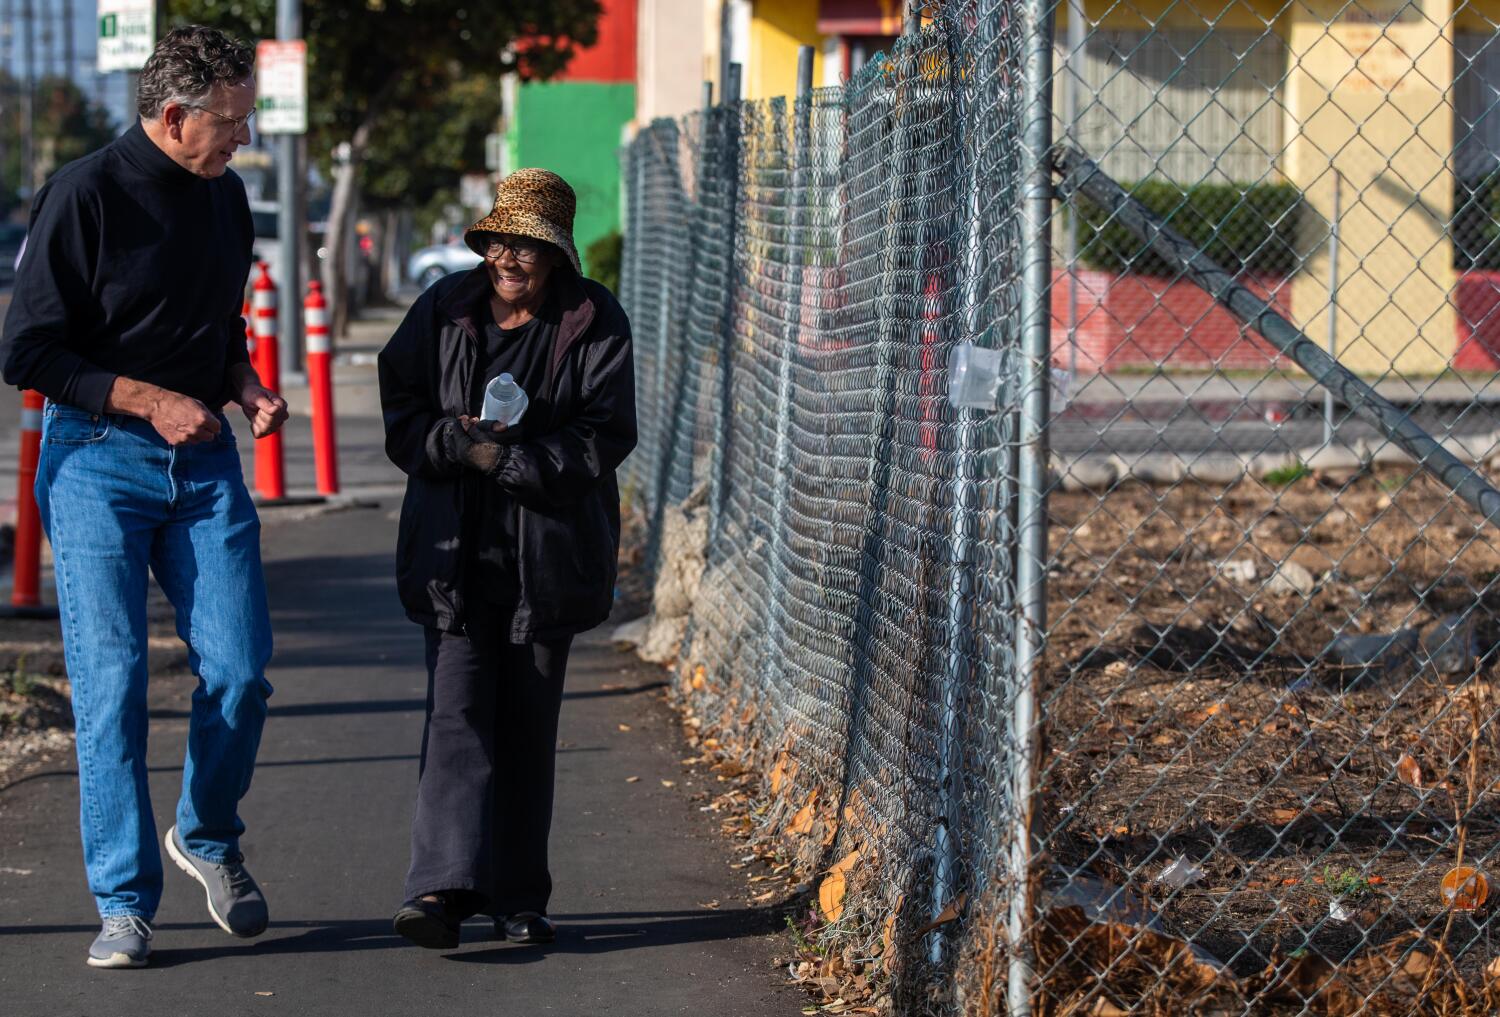 Nonprofit plans to transform a former oil drilling site in South L.A. into affordable housing